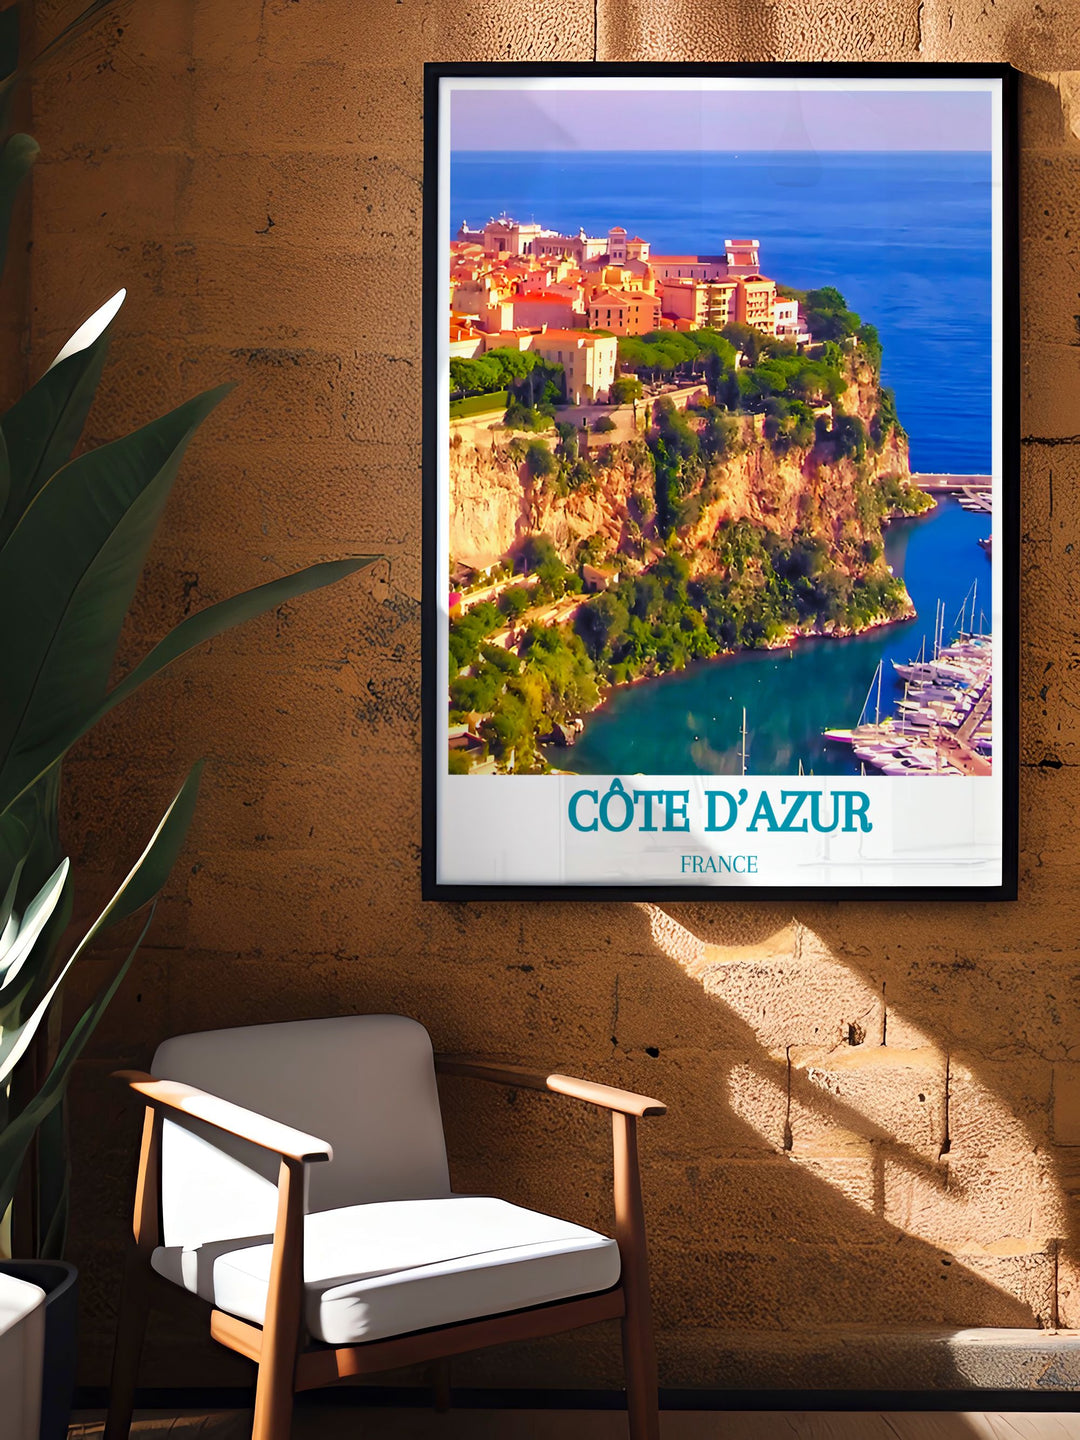 Framed art print of the Côte dAzur, showcasing the stunning Le Rocher and its surroundings. The artwork captures the natural beauty and historical significance of this landmark, with its panoramic views of Monaco and the Mediterranean Sea, perfect for any art lover.